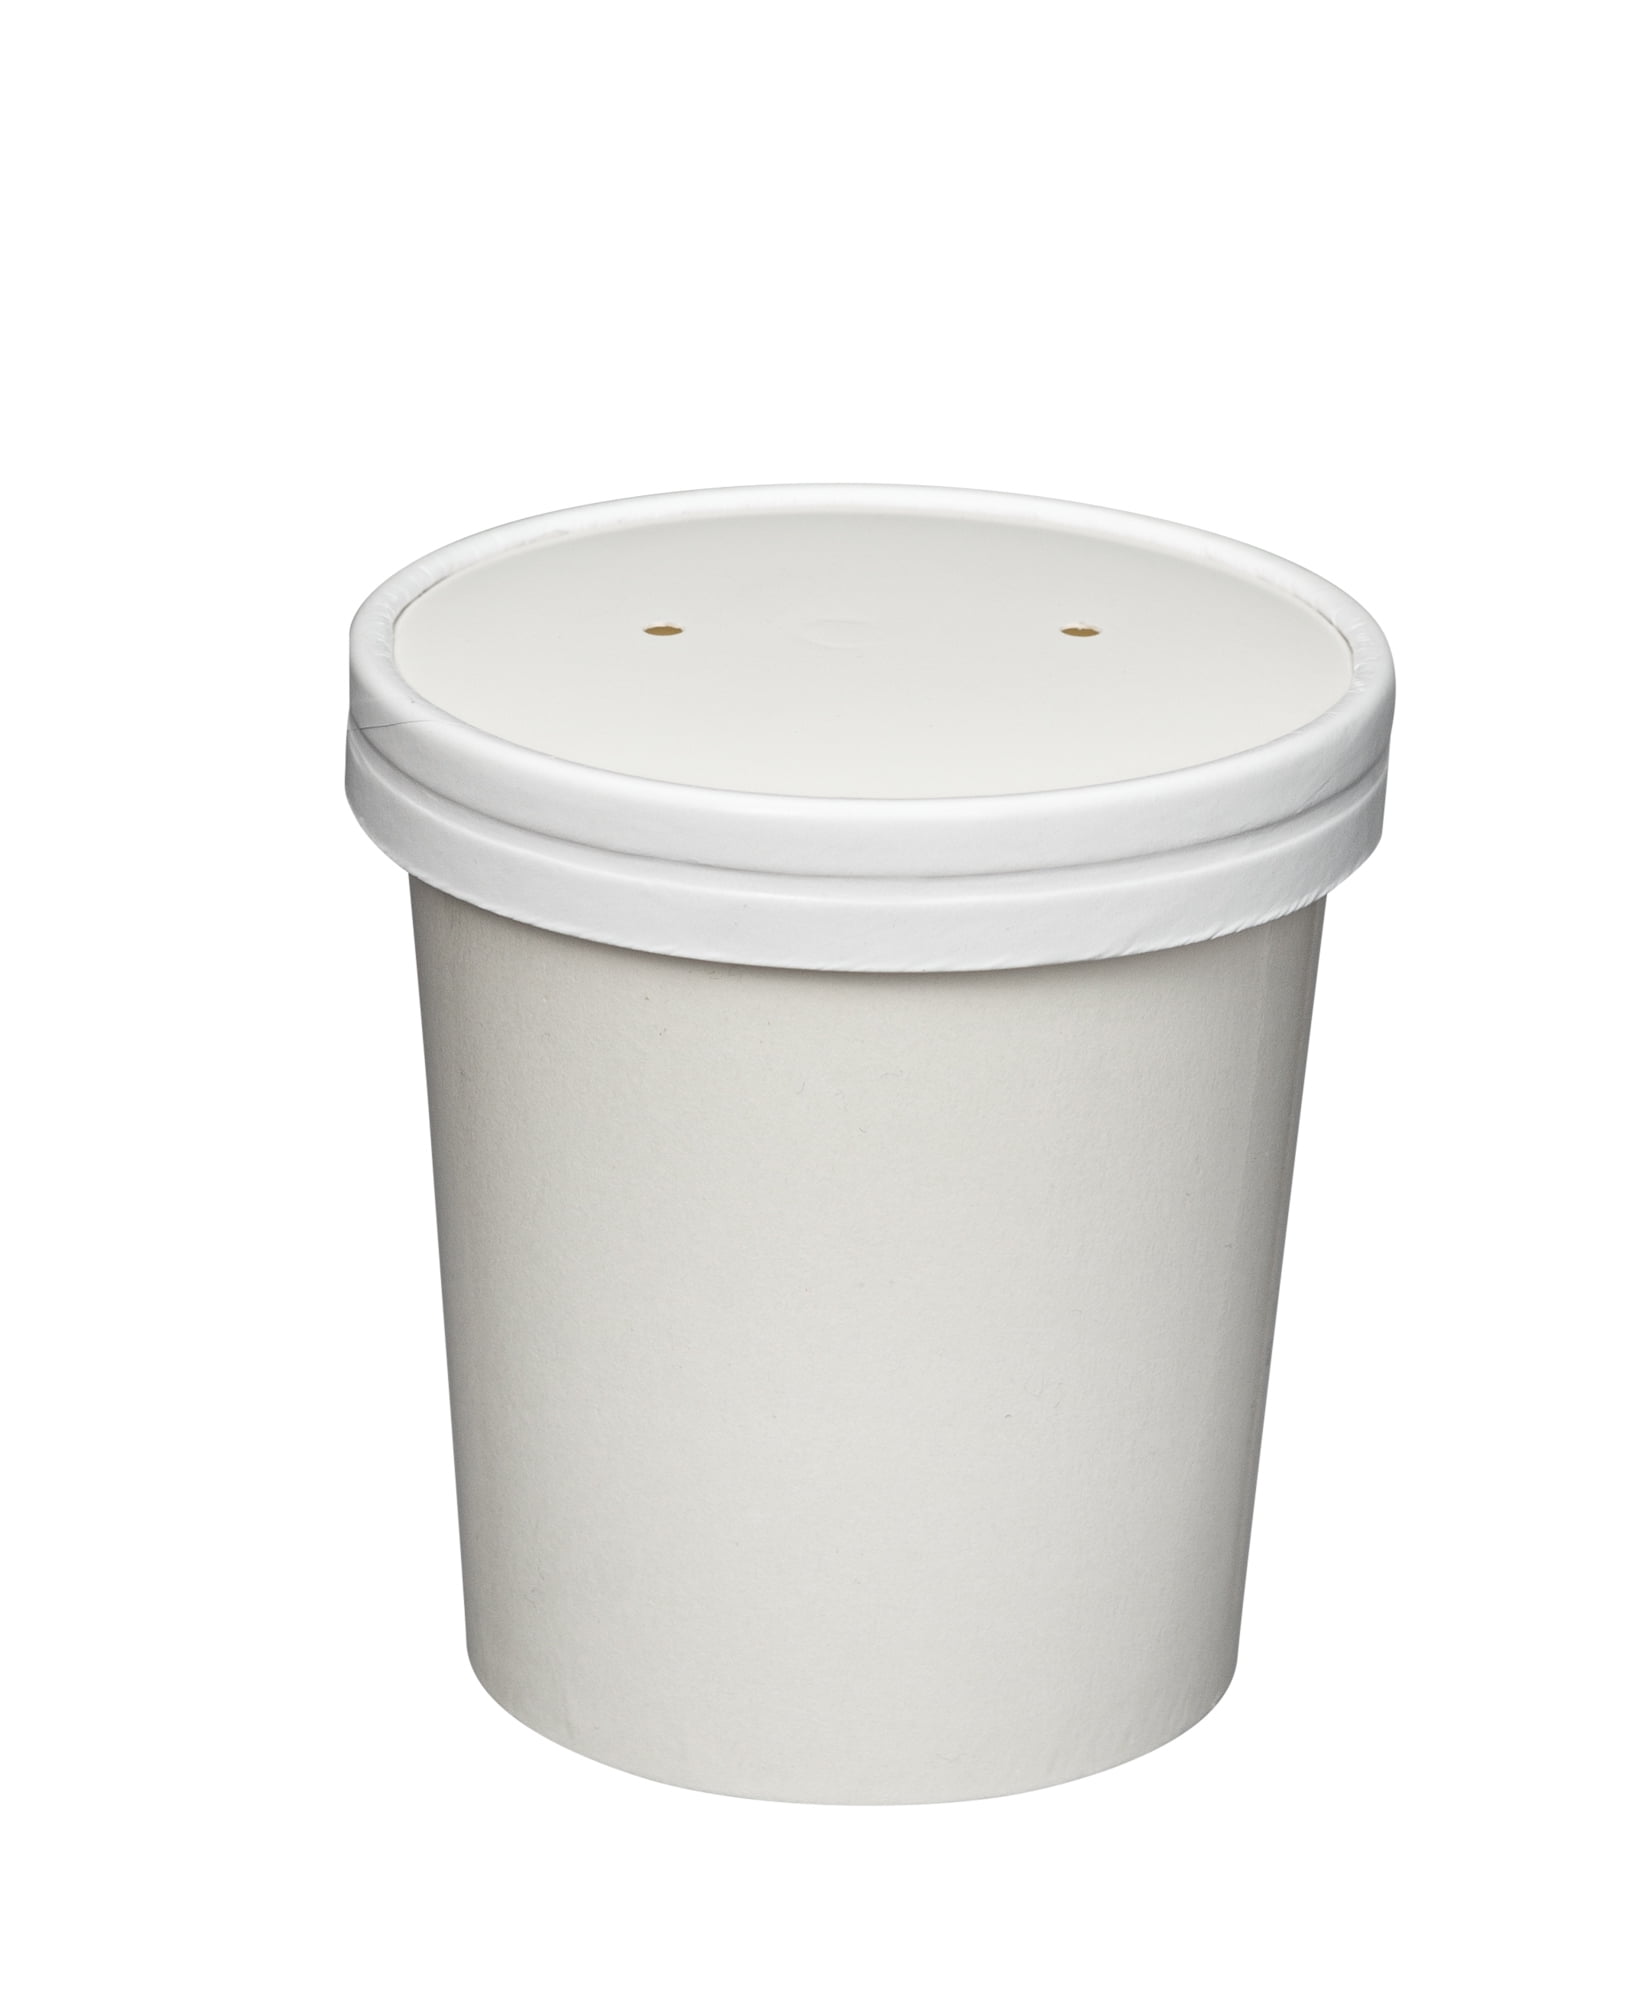  Comfy Package 16 oz. Paper Containers With Vented Lids, To Go  Hot Soup Bowls, Disposable Ice Cream Cups, White - 25 Sets : Health &  Household